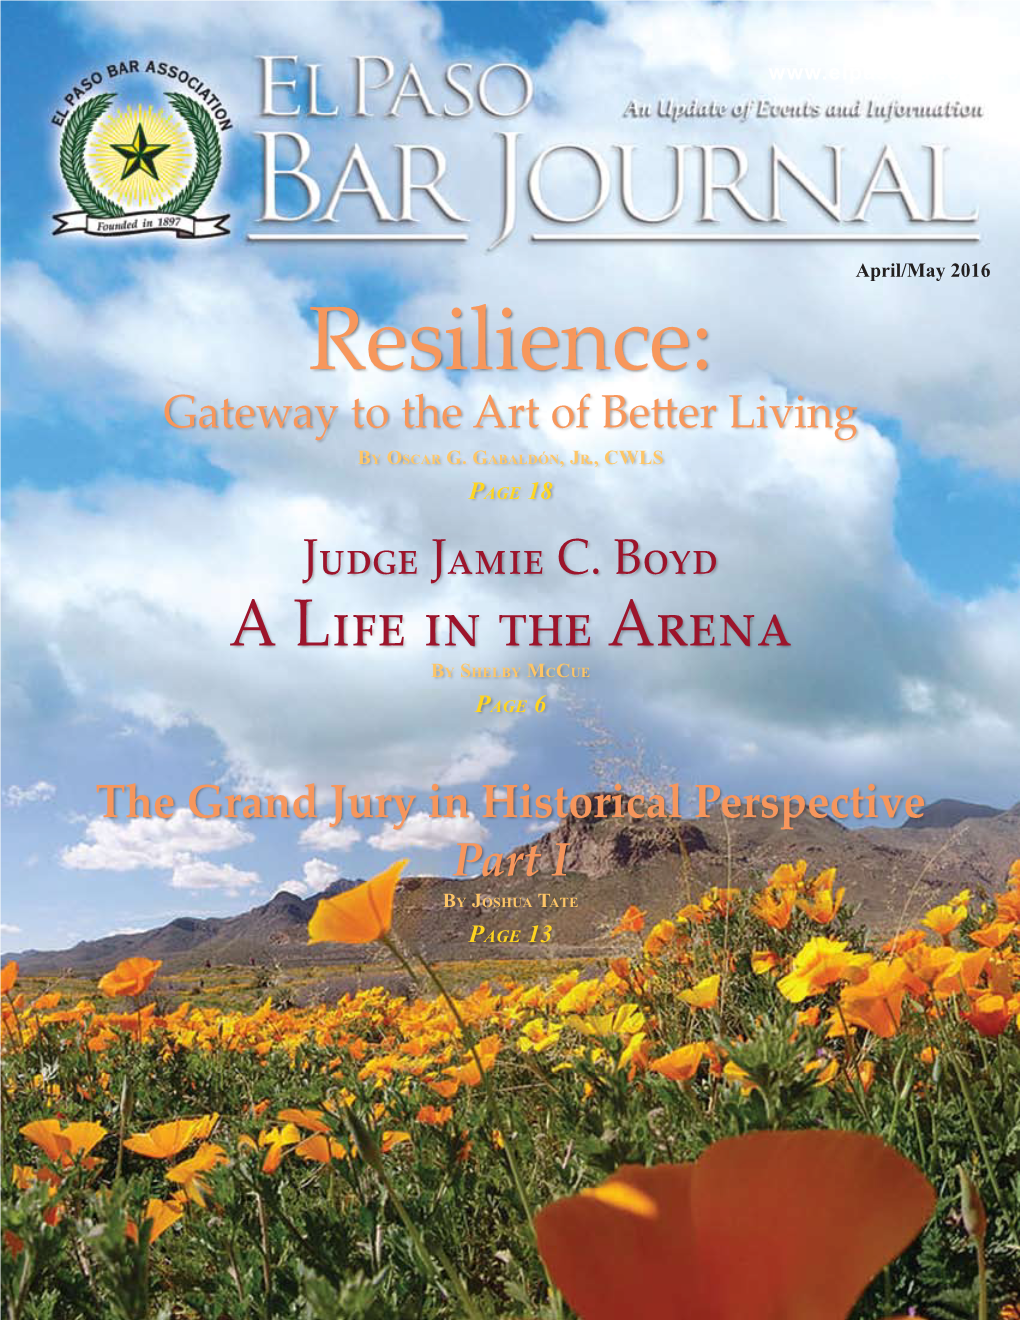 Resilience: Gateway to the Art of Better Living by Os C a R G